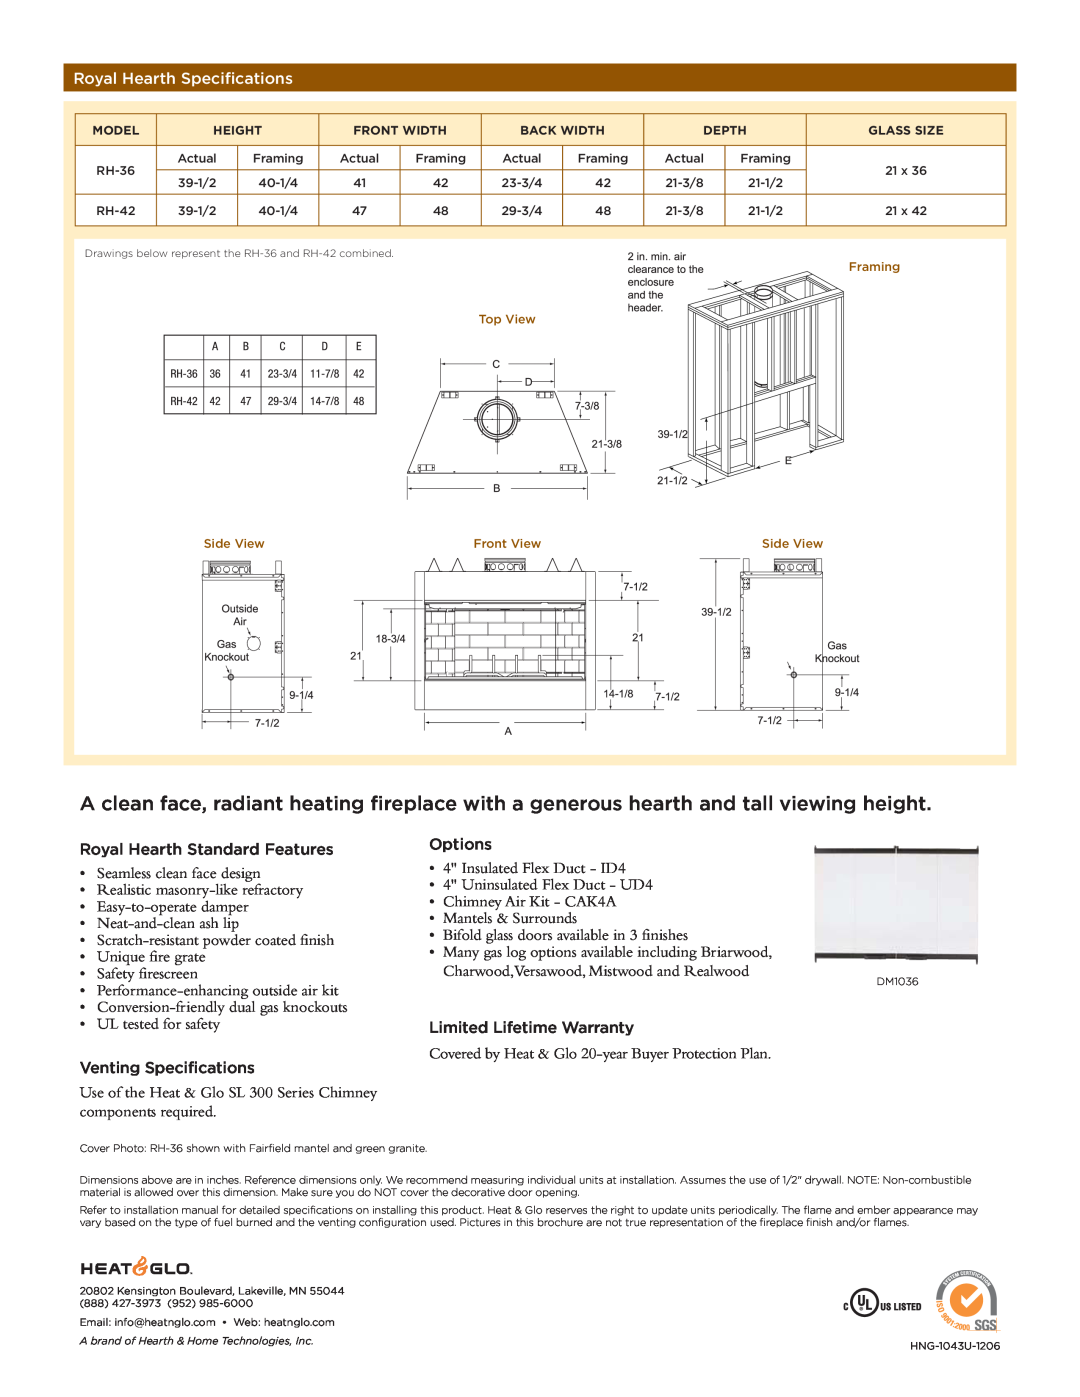 Hearth and Home Technologies manual Royal Hearth Specifications, Royal Hearth Standard Features, Venting Specifications 